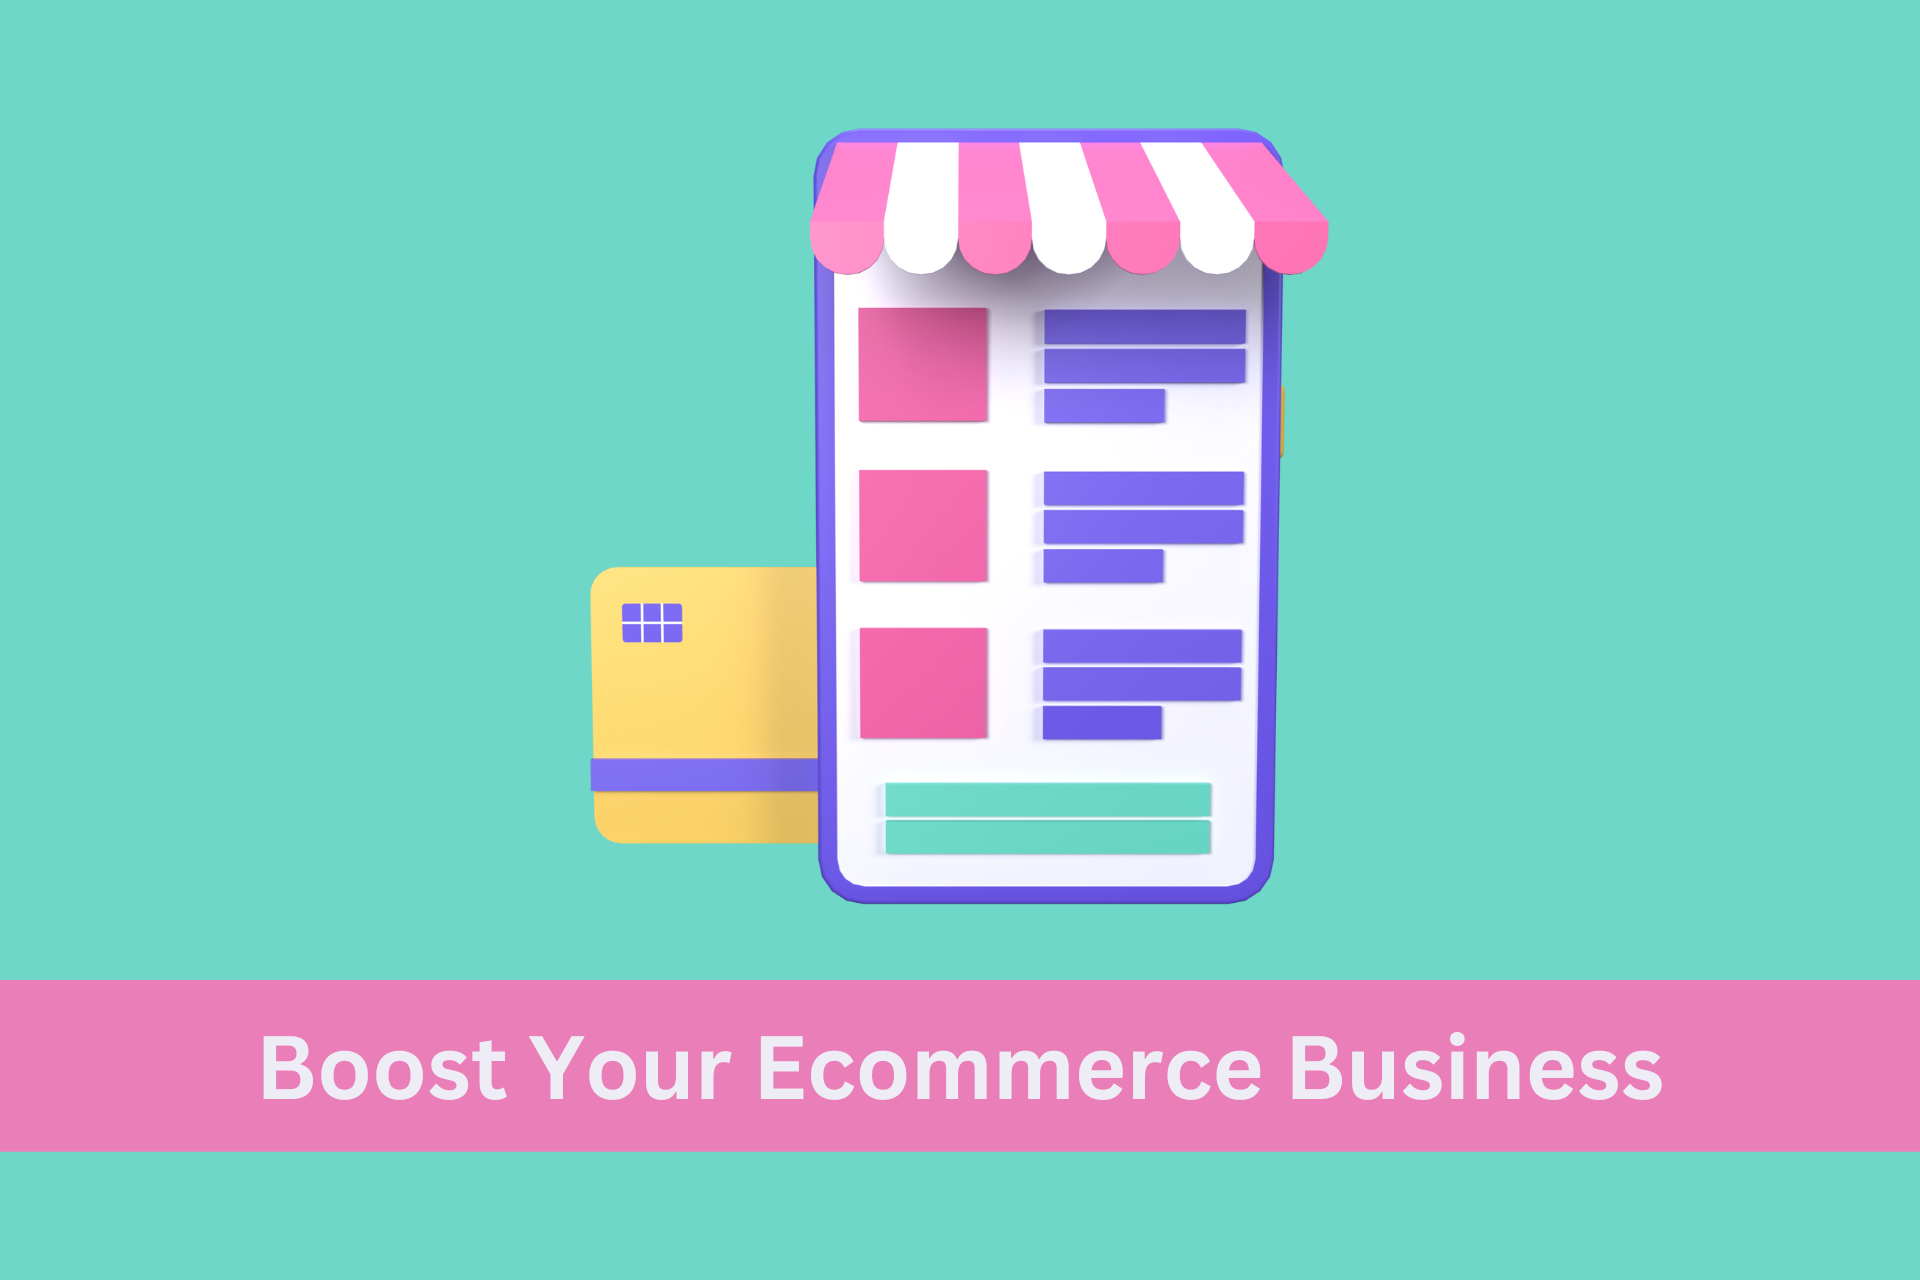 Boost Your Ecommerce Business